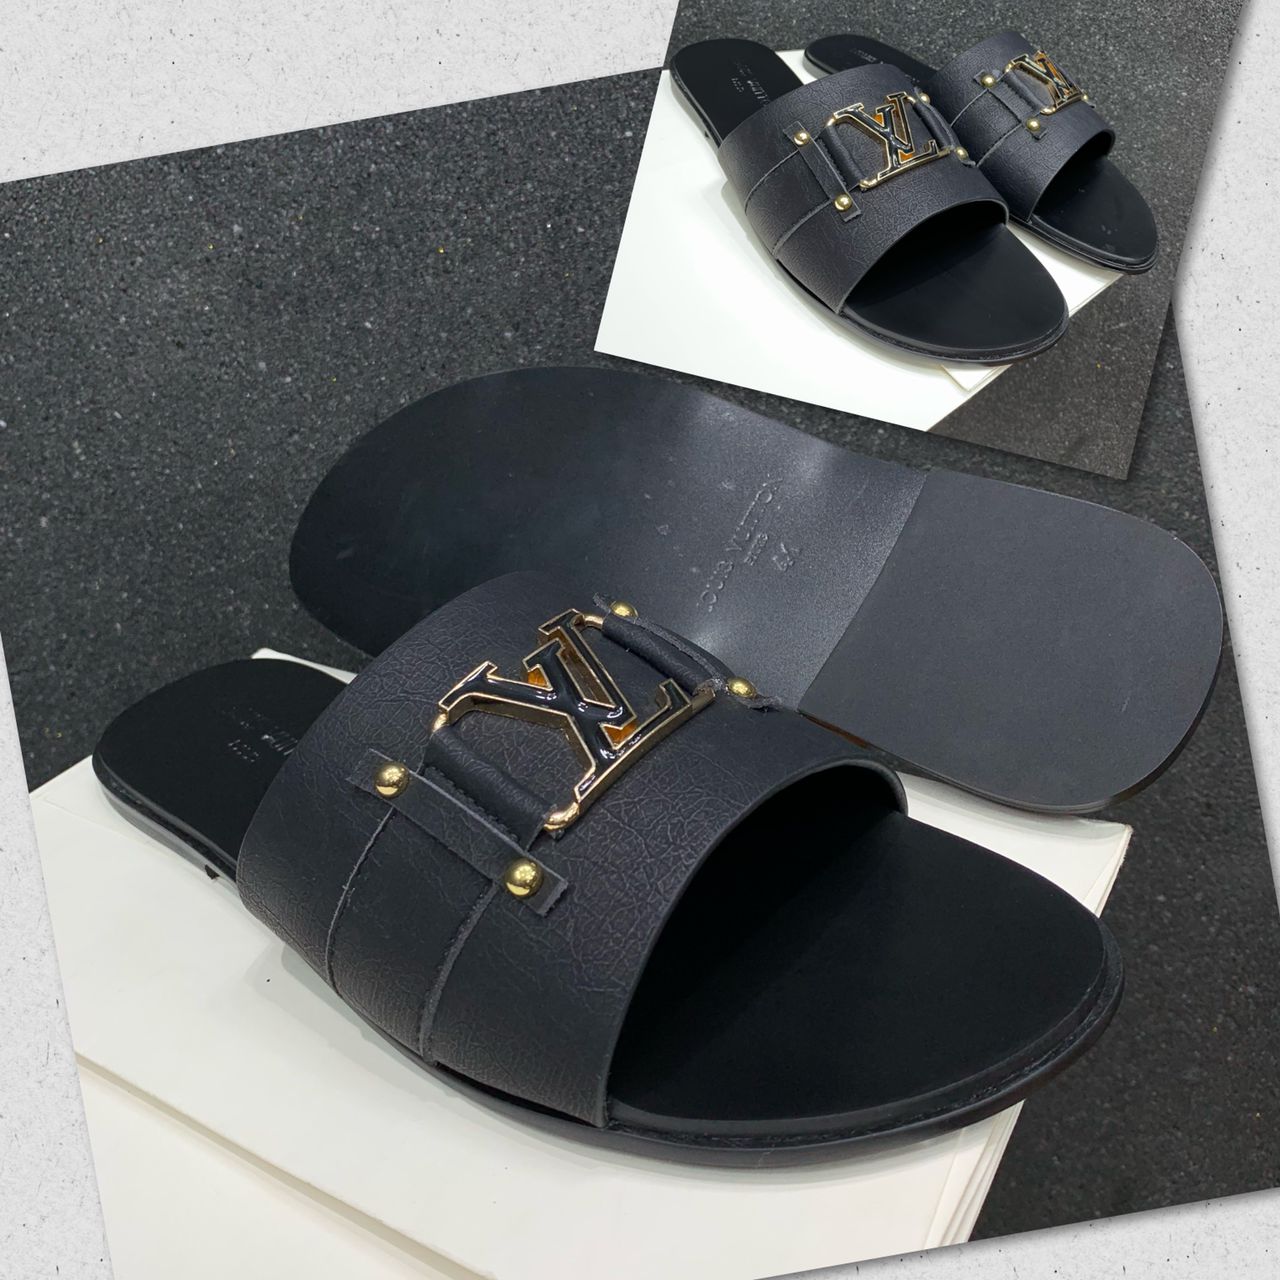 LEATHER DESIGNER PALM SLIPPERS SLIDE  CartRollers ﻿Online Marketplace  Shopping Store In Lagos Nigeria